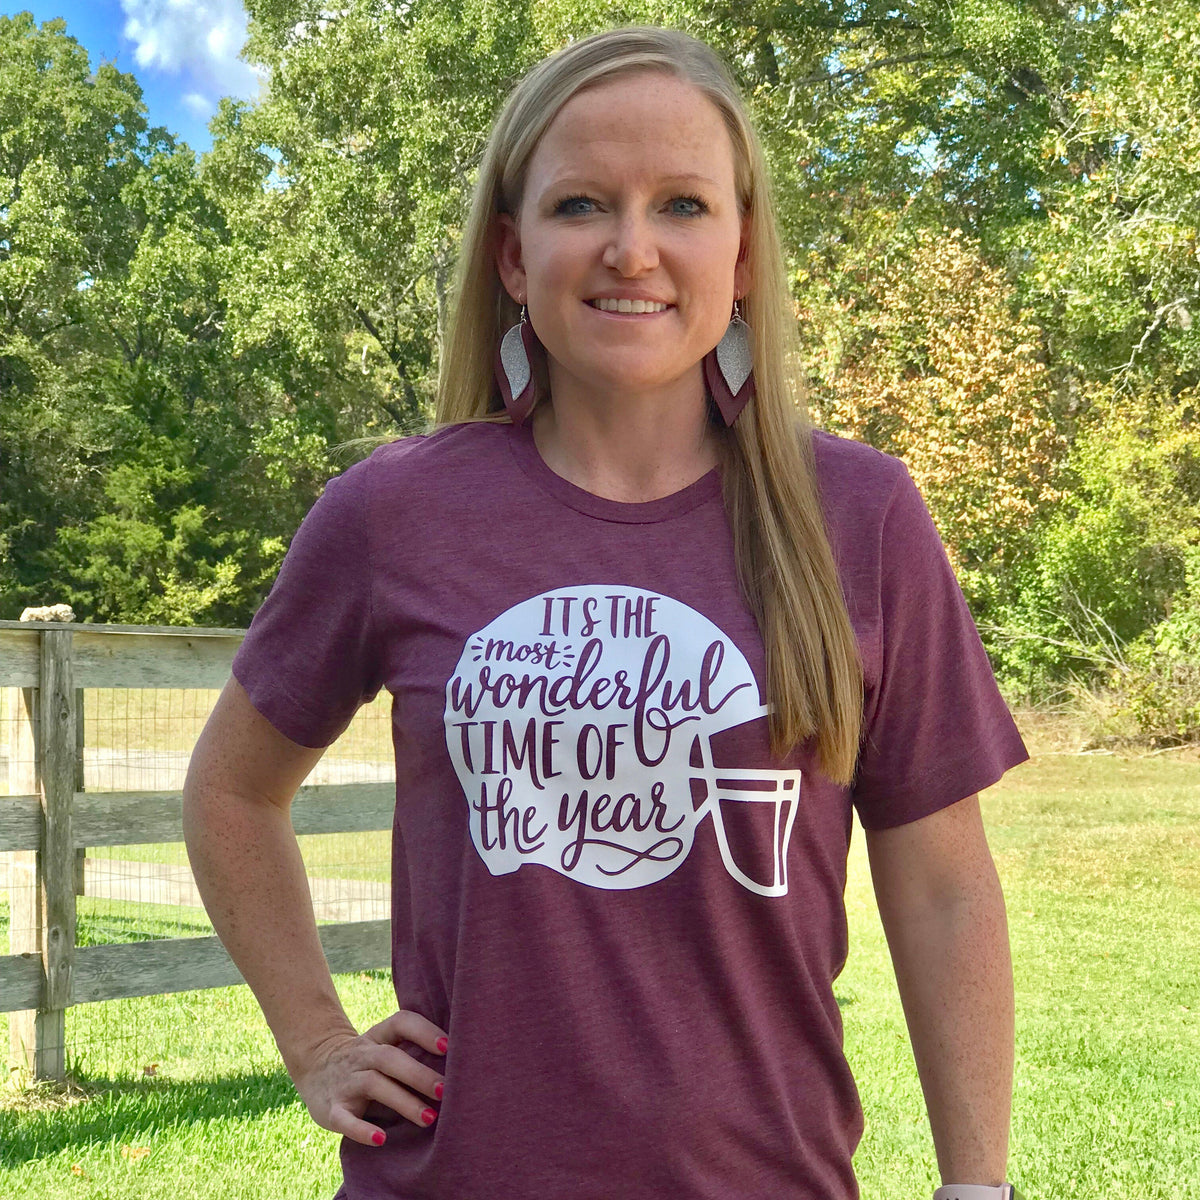 Aggie Game Day shirt, Texas A&M Family shirts, vinyl shirt, crew neck  triblend tee, color options, Aggie Football game day shirt freeshipping -  LaceyRaeDesigns